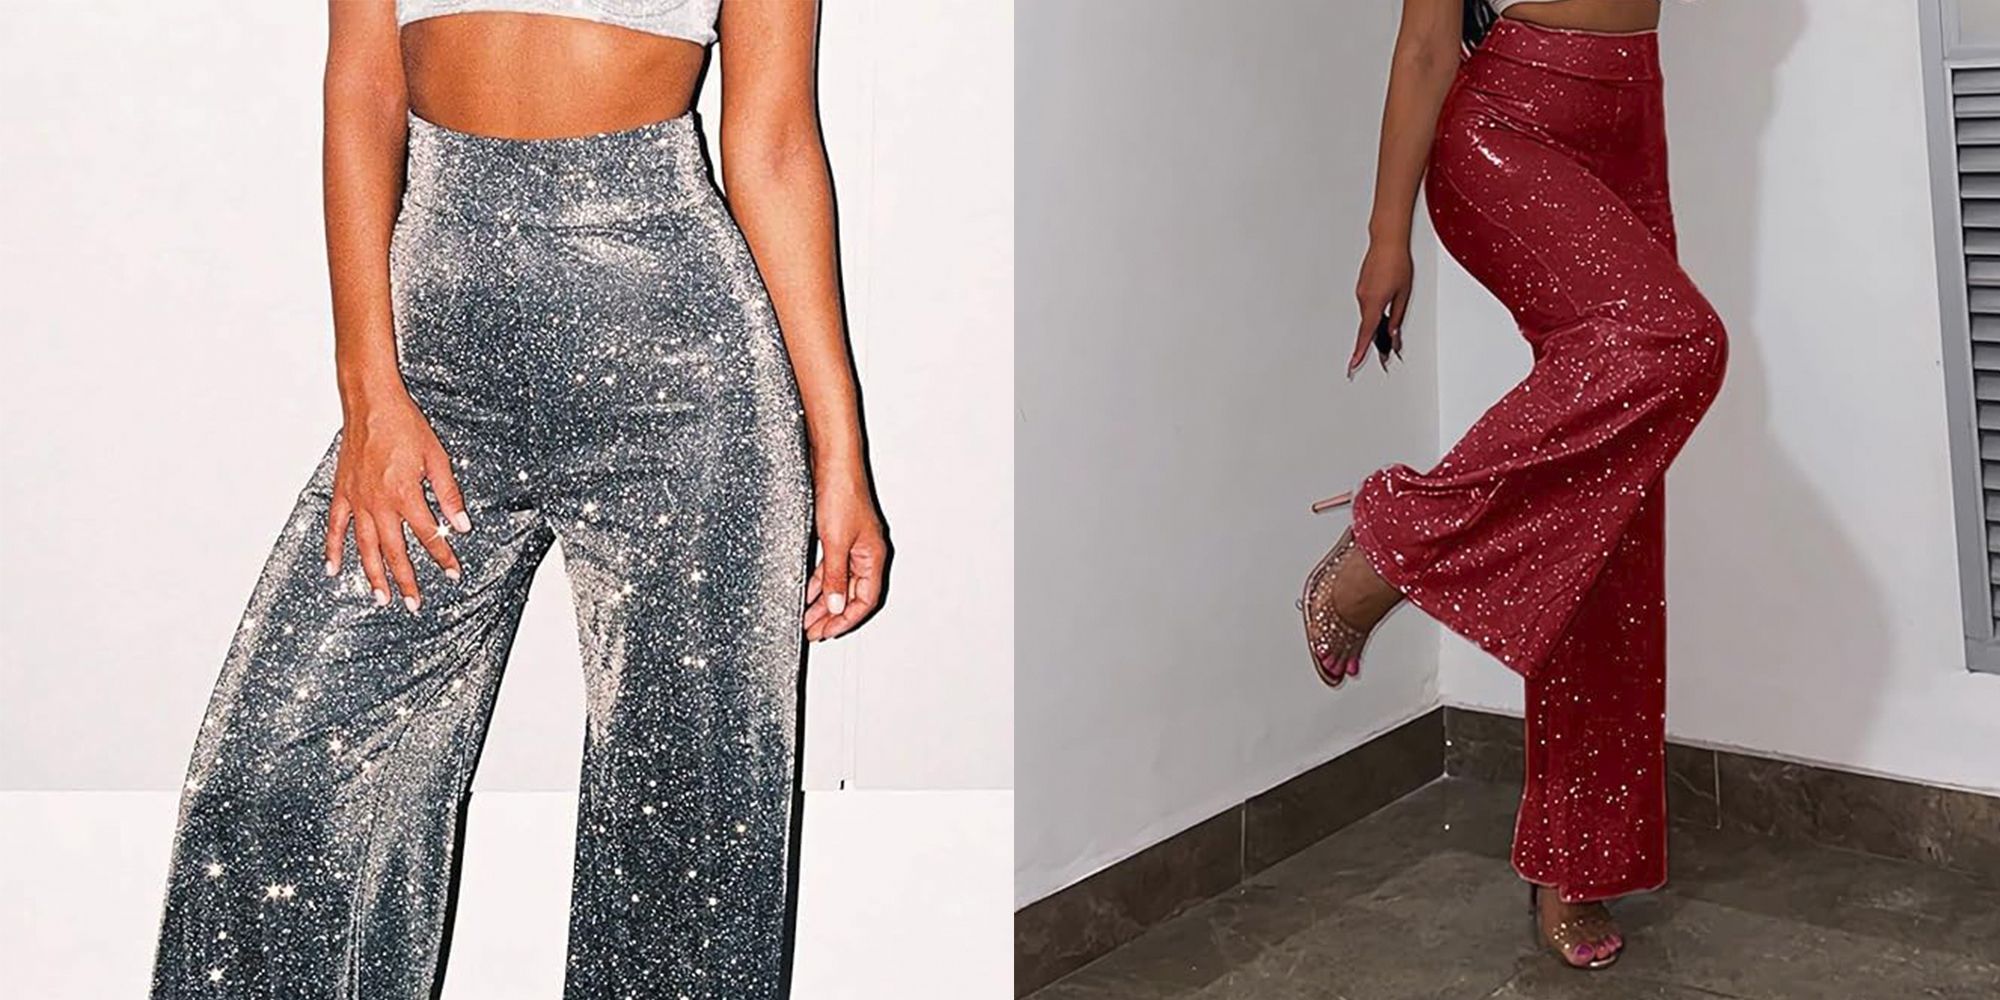 Black Sequin Pants Outfits For Women (14 ideas & outfits)